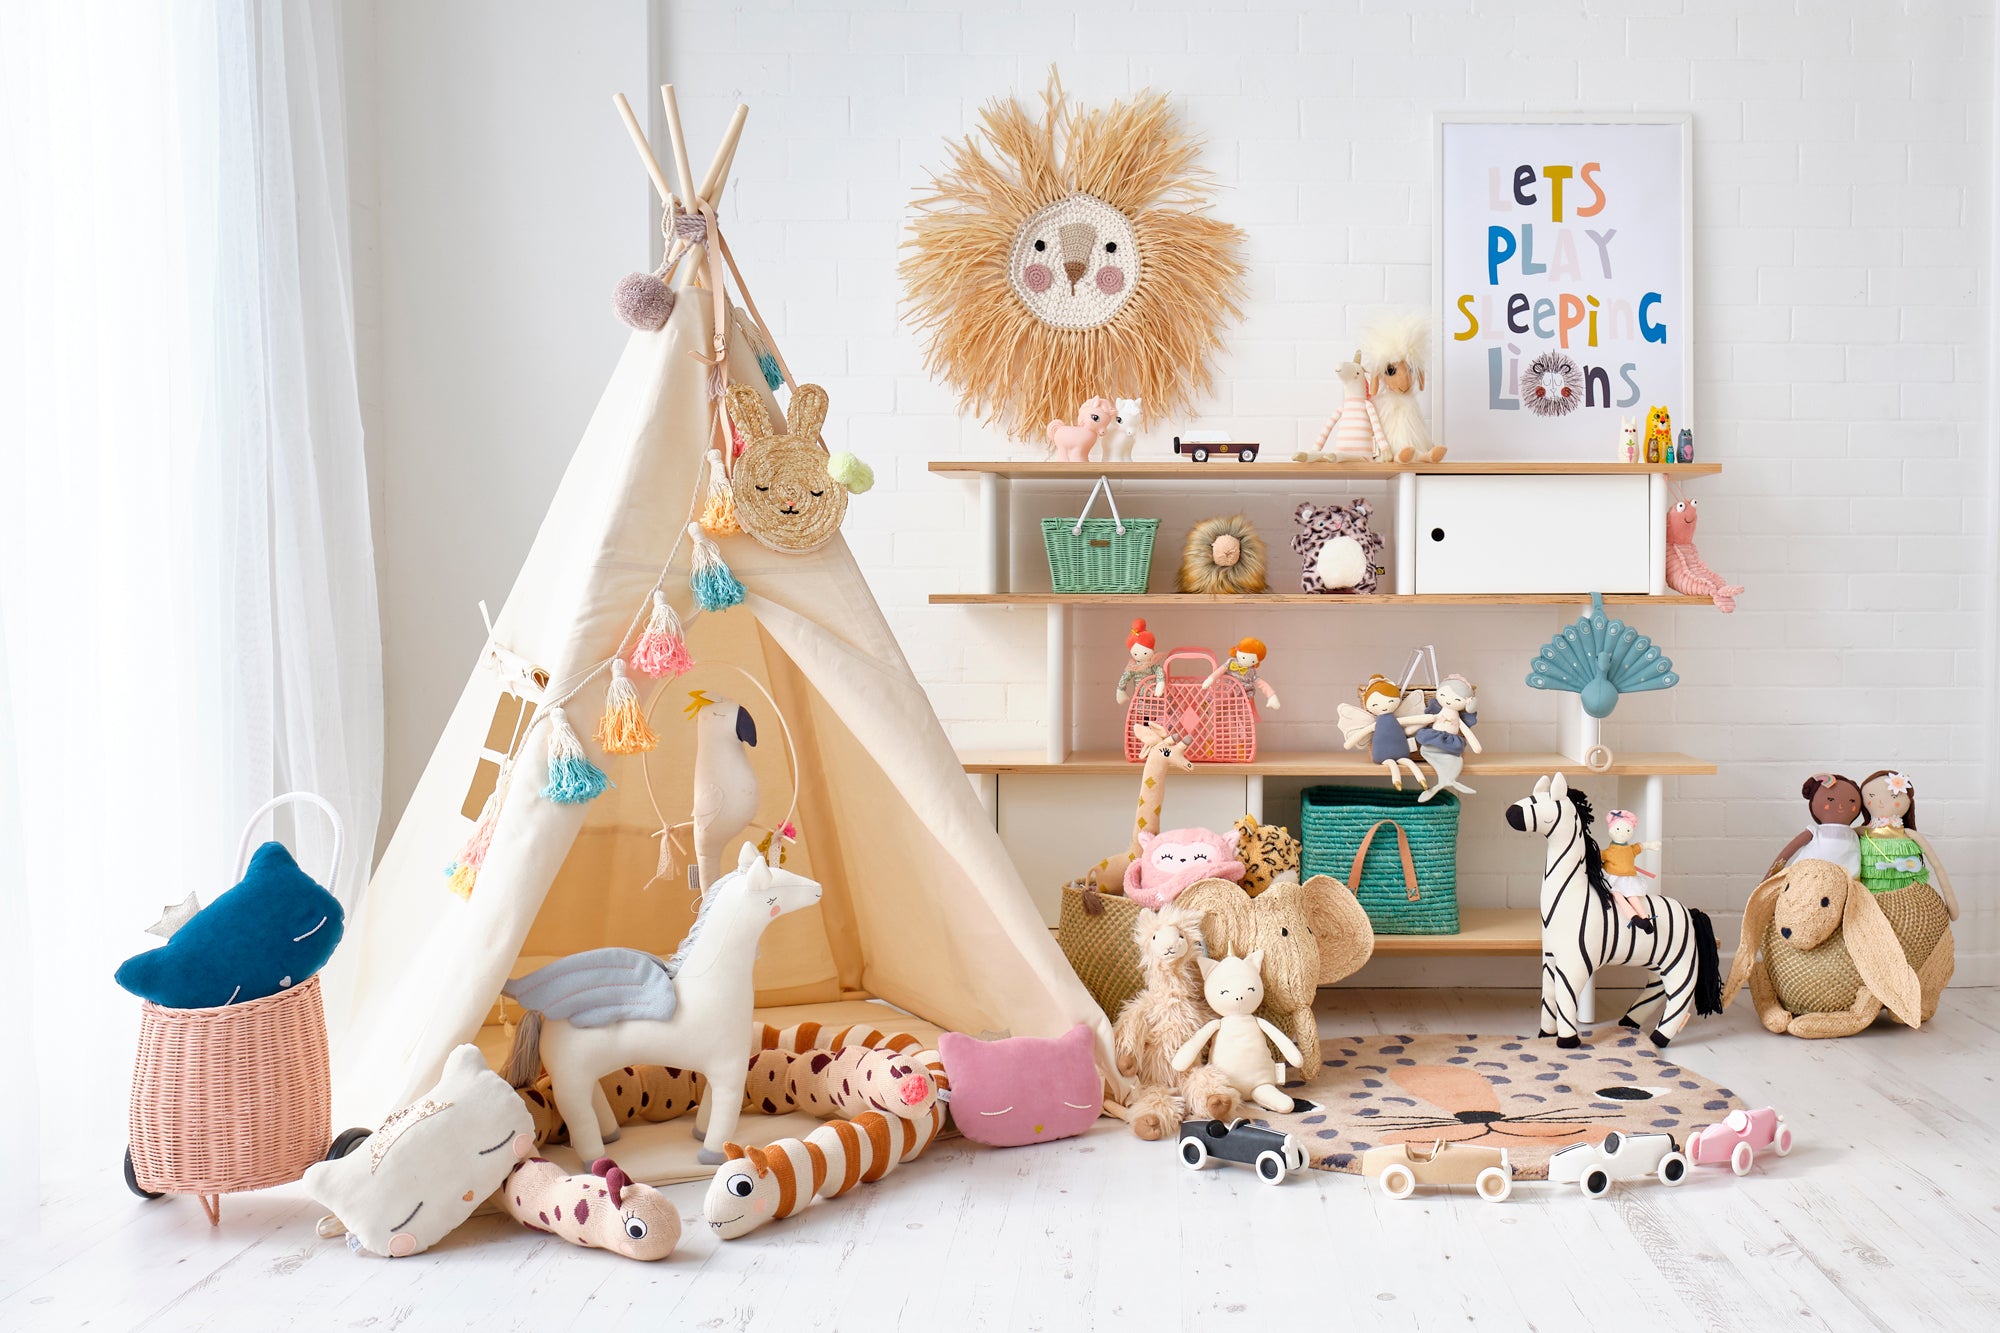 'Savannah!' Children's Playroom, created and styled by Bobby Rabbit.